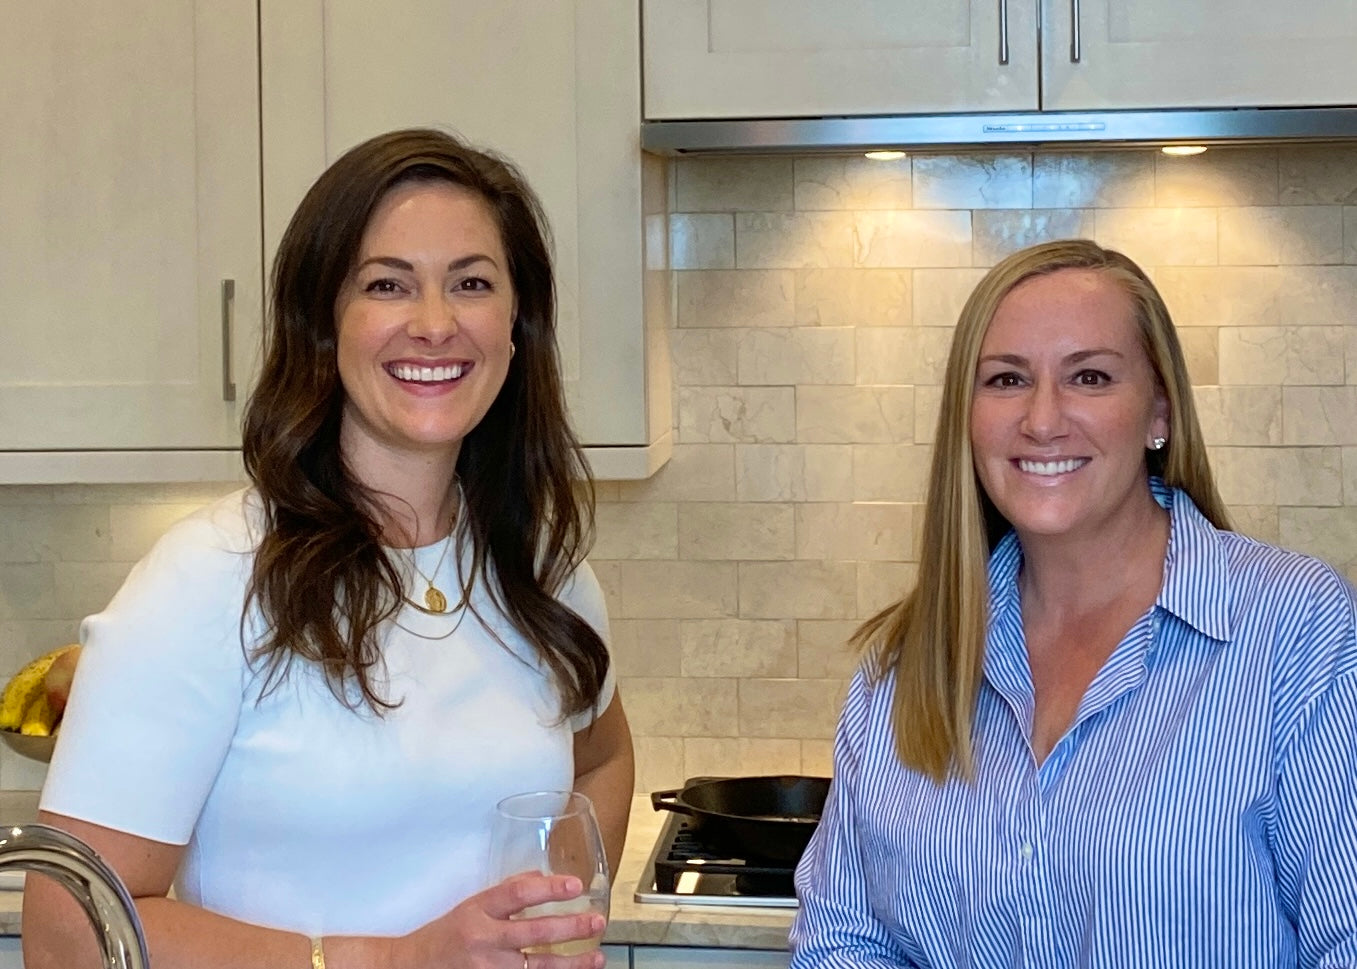 Ashley and Joci Besecker, female founders of the woman-owned business, Premier Catch, standing in the kitchen